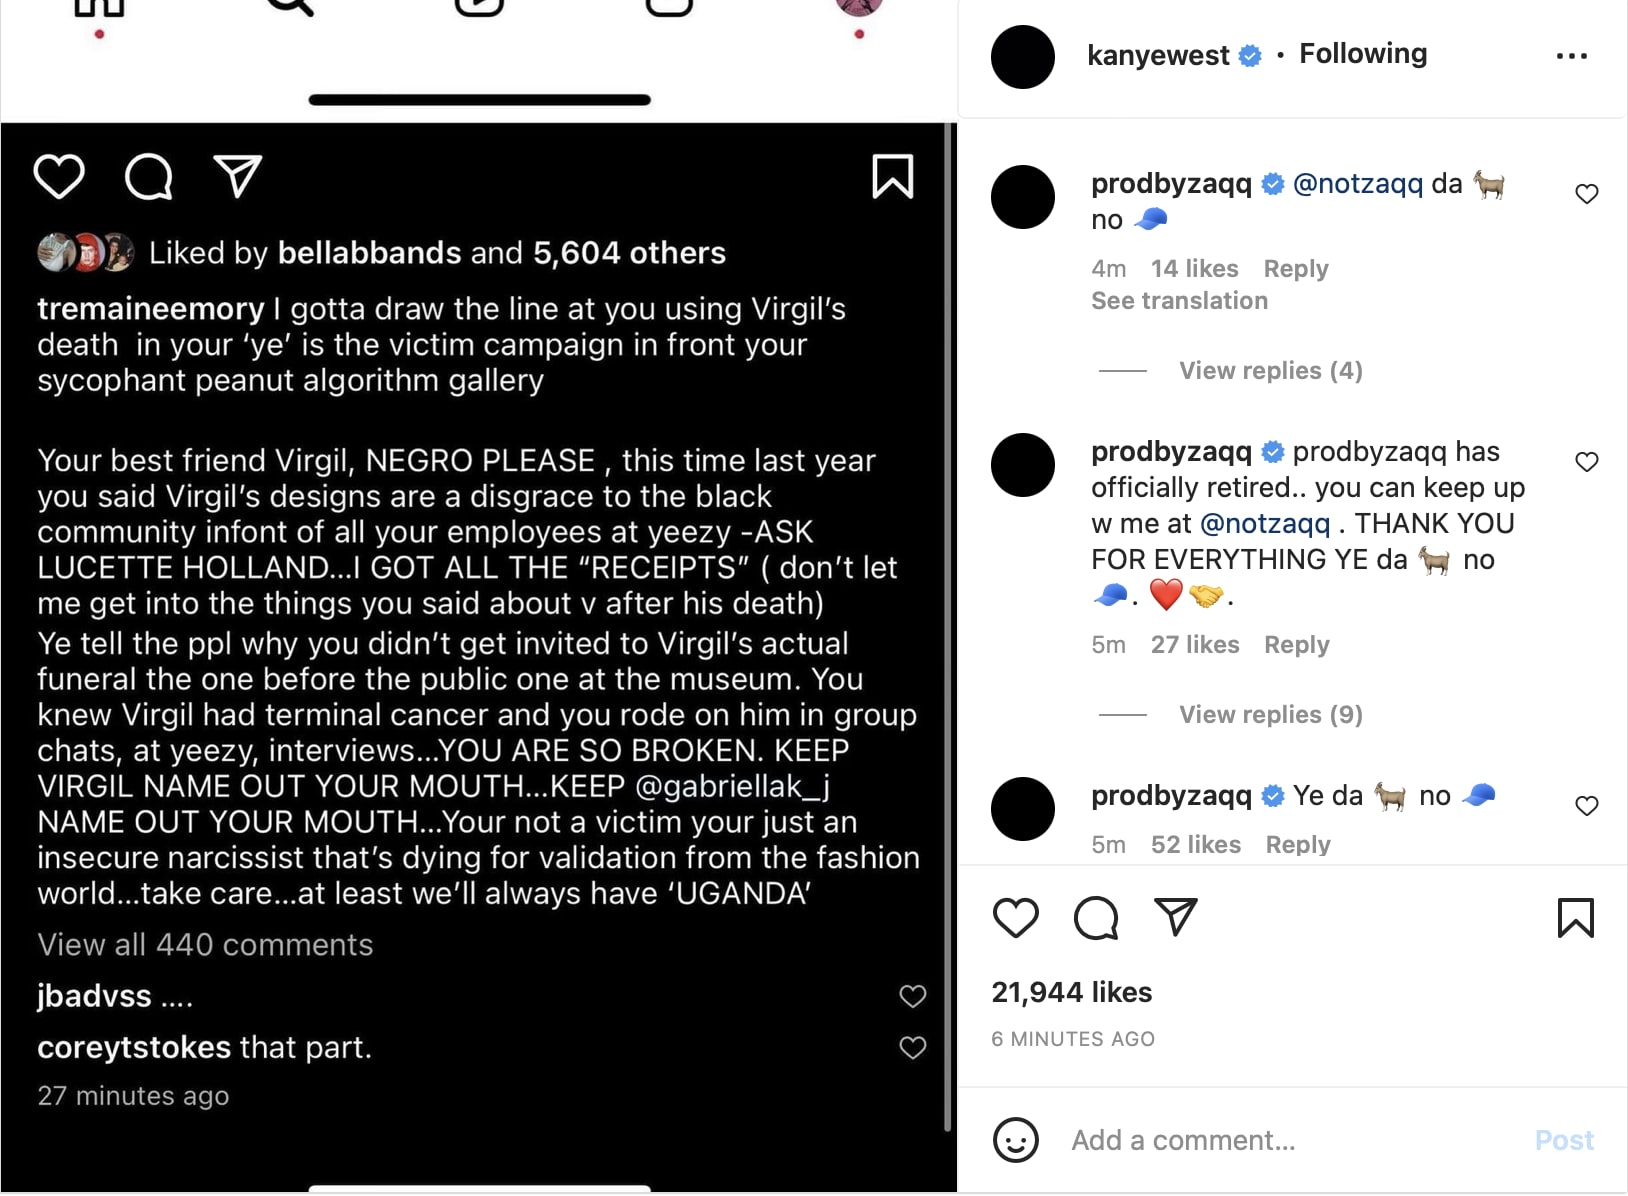 kanye west reposts emory&#x27;s message to his IG account